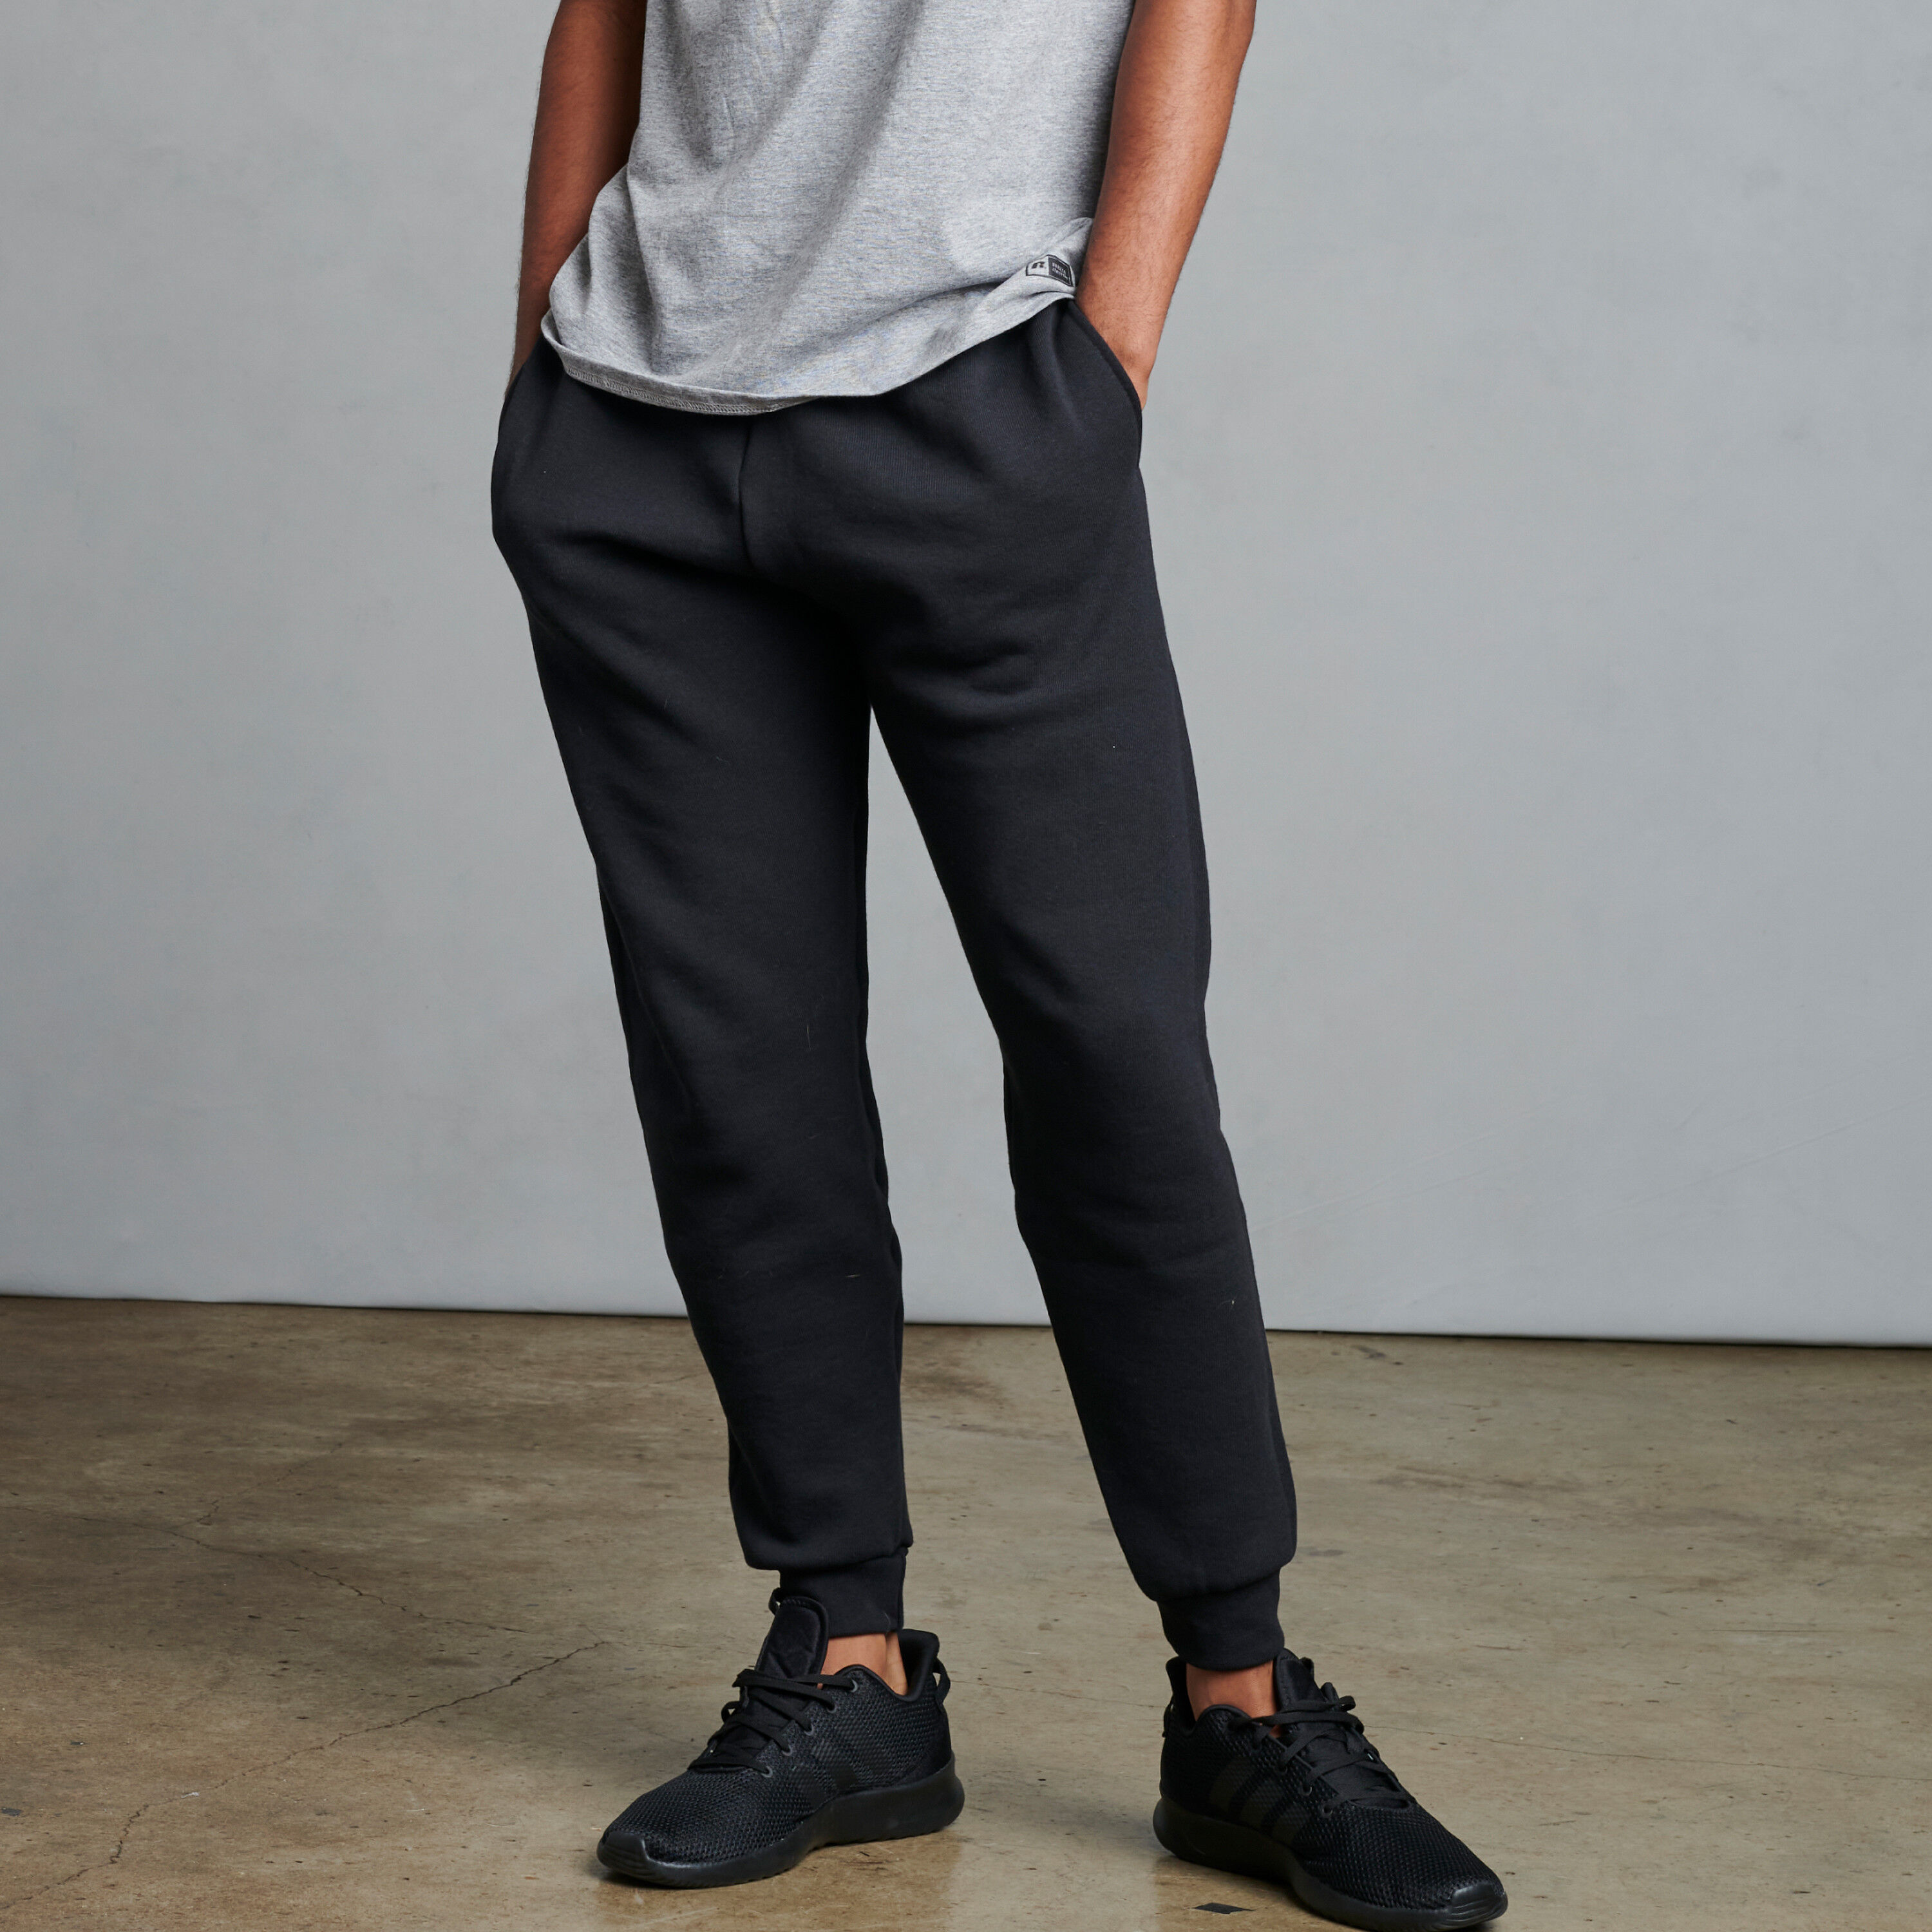 Men's Athletic Sweatpants With & Without Pockets | Russell